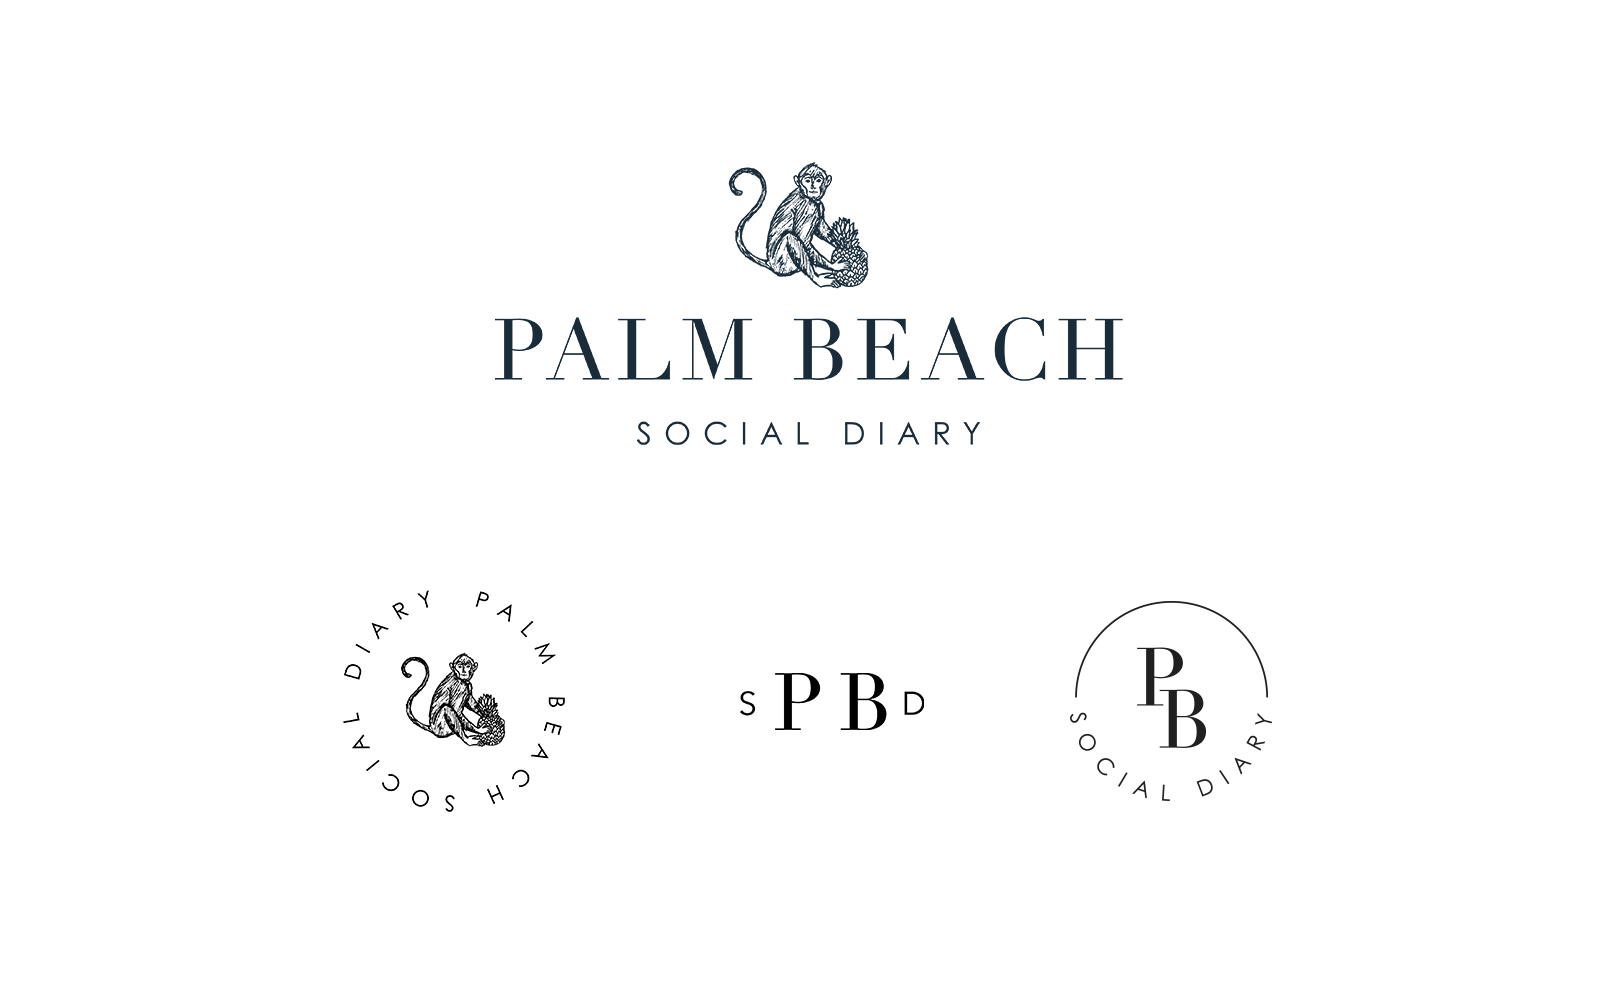 Palm Beach Social Diary logo variations, showing off the primary logo with a custom monkey icon and PALM BEACH in a classy serif, and SOCIAL DIARY in a clean san serif. Circular and stamp logo variations are shown below.